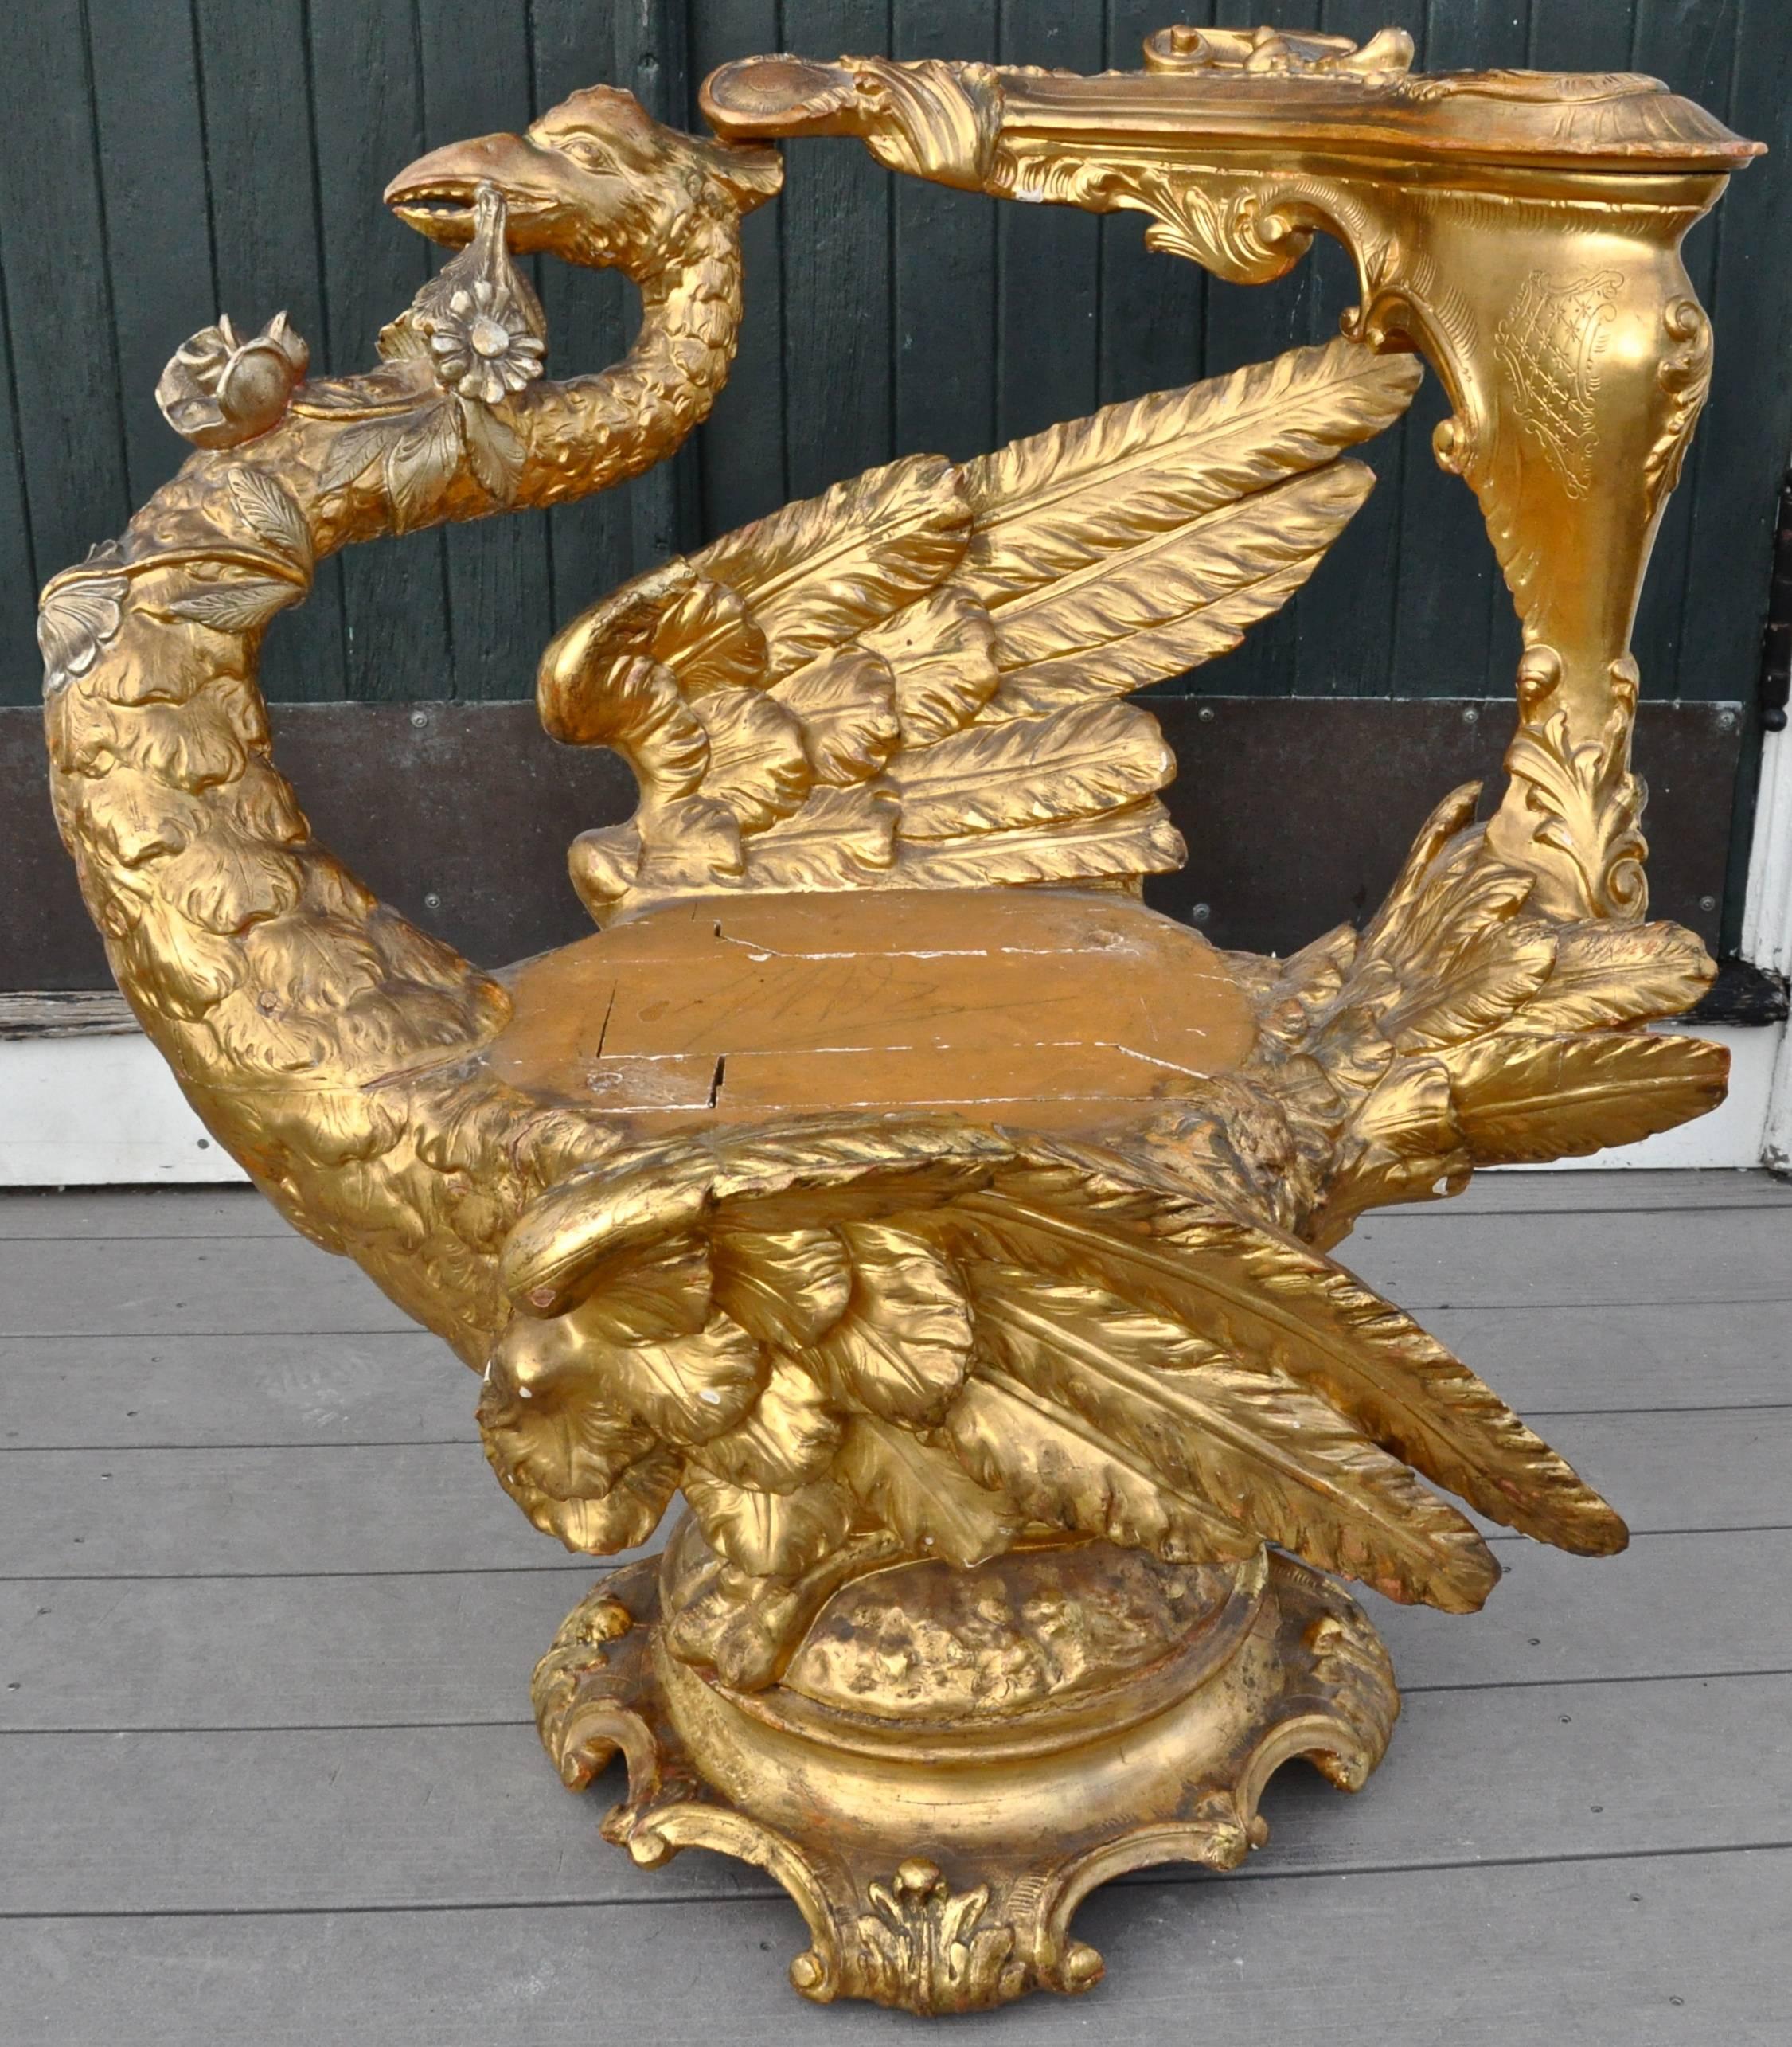 Rare and complete 19th century carved and gilt Venetian swan Grotto chair.

Realistically and exquisitely carved swan. Carved on all sides. Feathers showing plumage. Armrest in Rococo C-Scroll. Swan sitting on Rococo base.
Retains its original